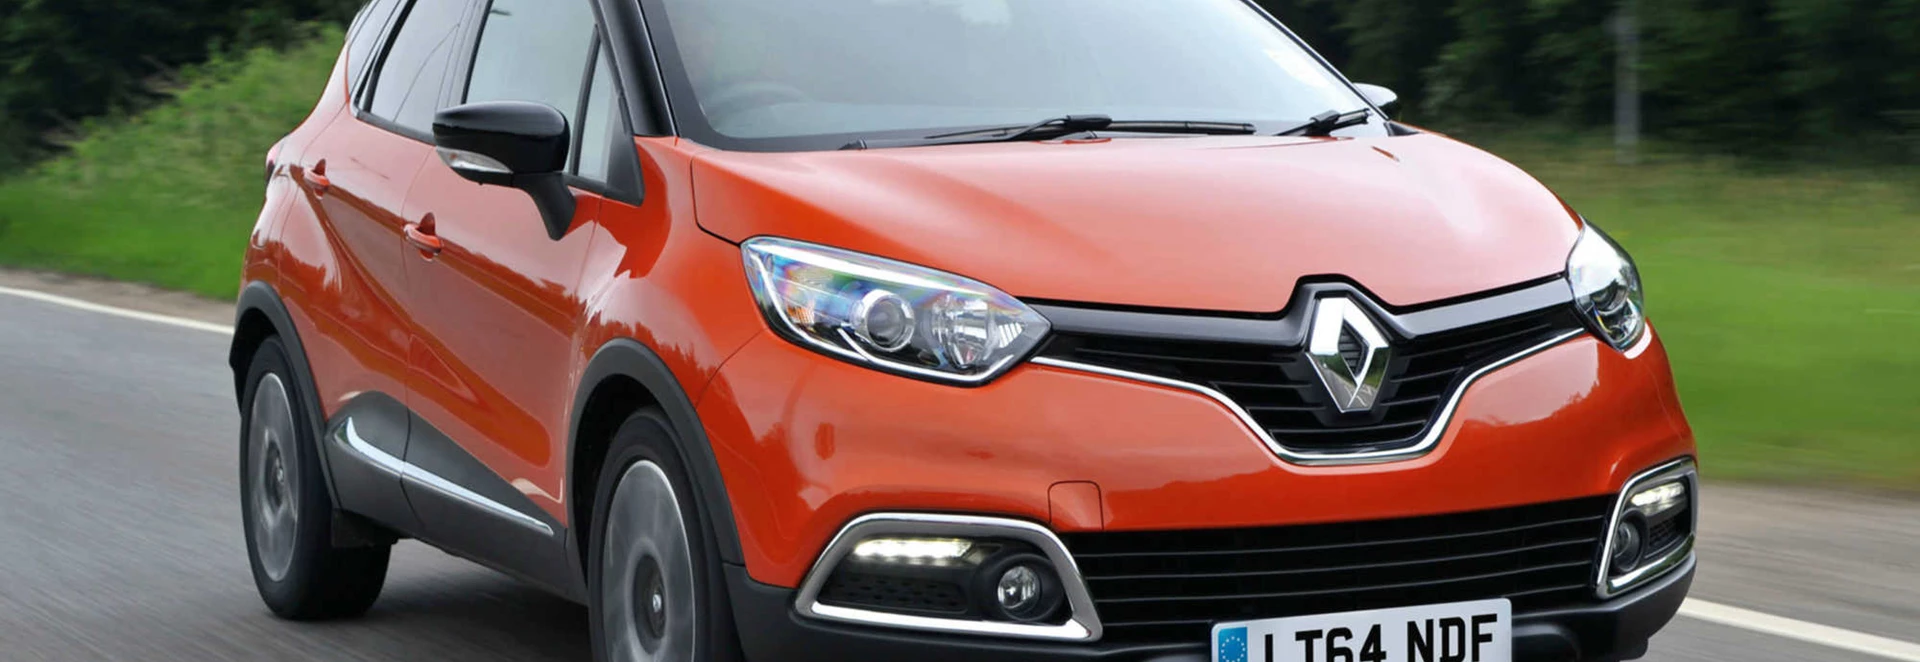 Renault Captur crossover review 